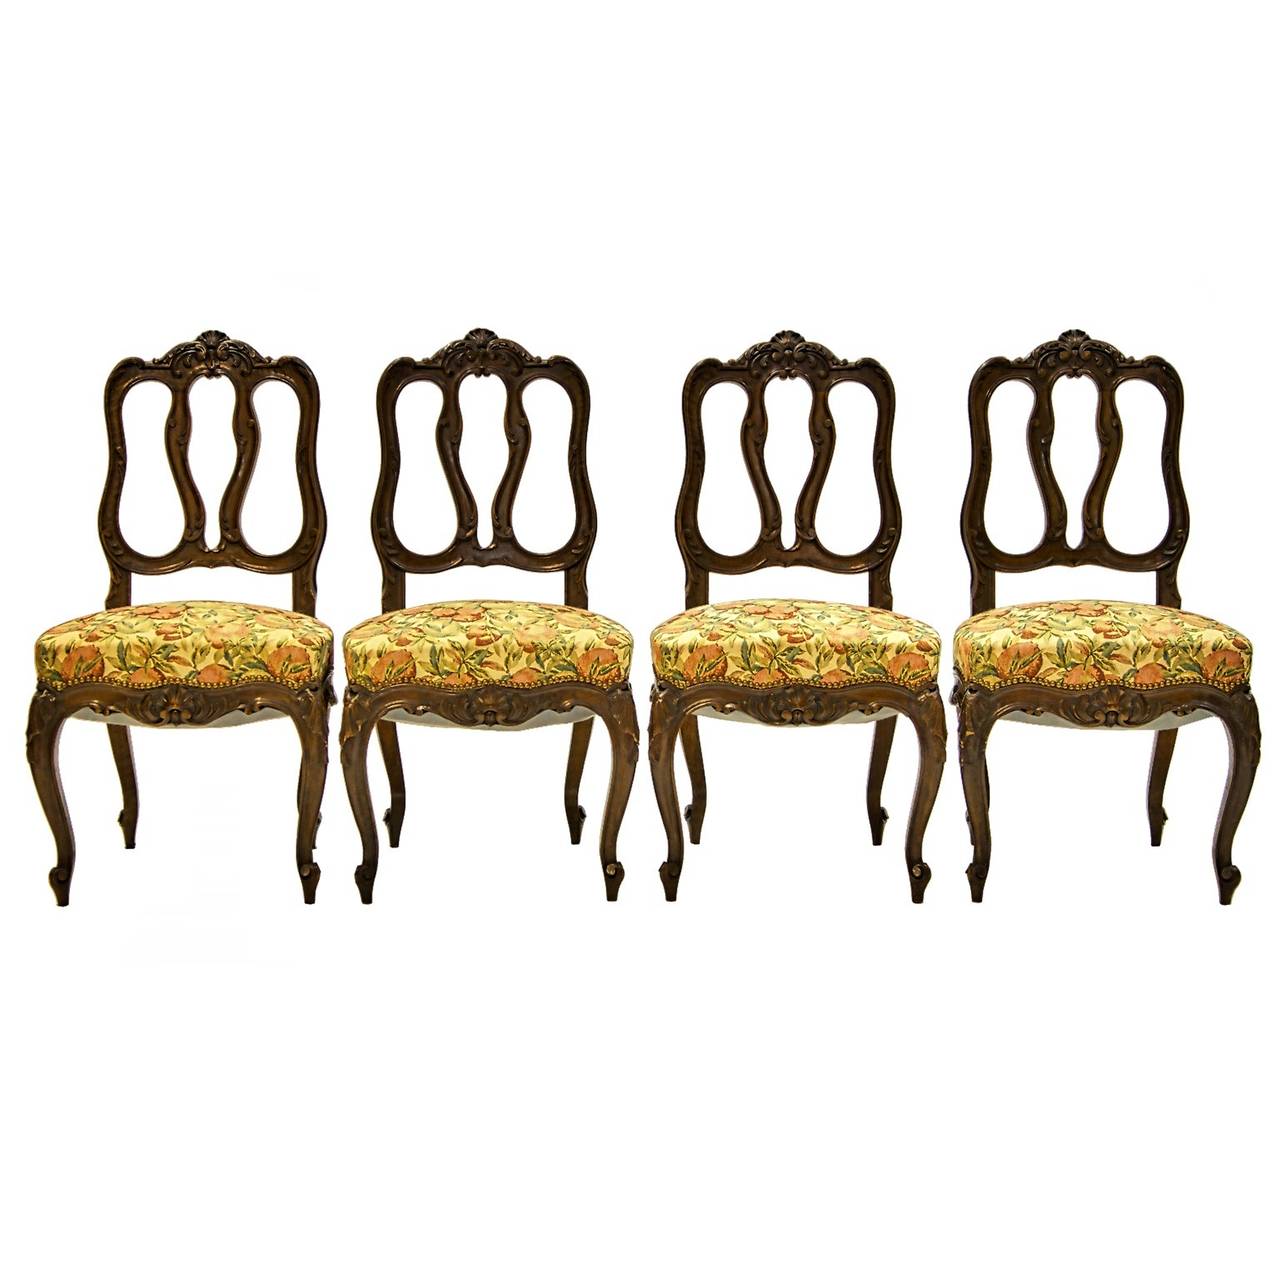 Late 19th Century Louis XV Style Walnut Side Chair 19th C. Set of 8